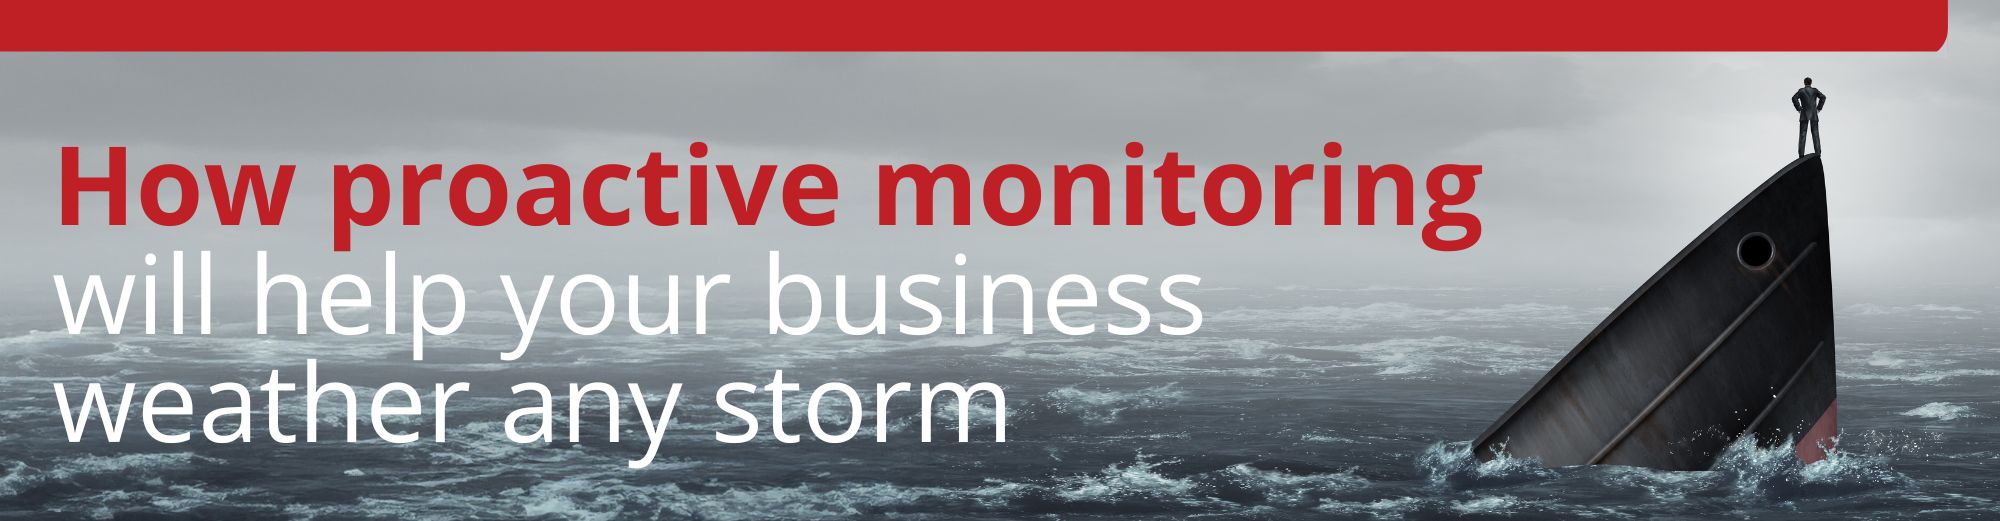 Proactive IT monitoring will help your business weather the storm.